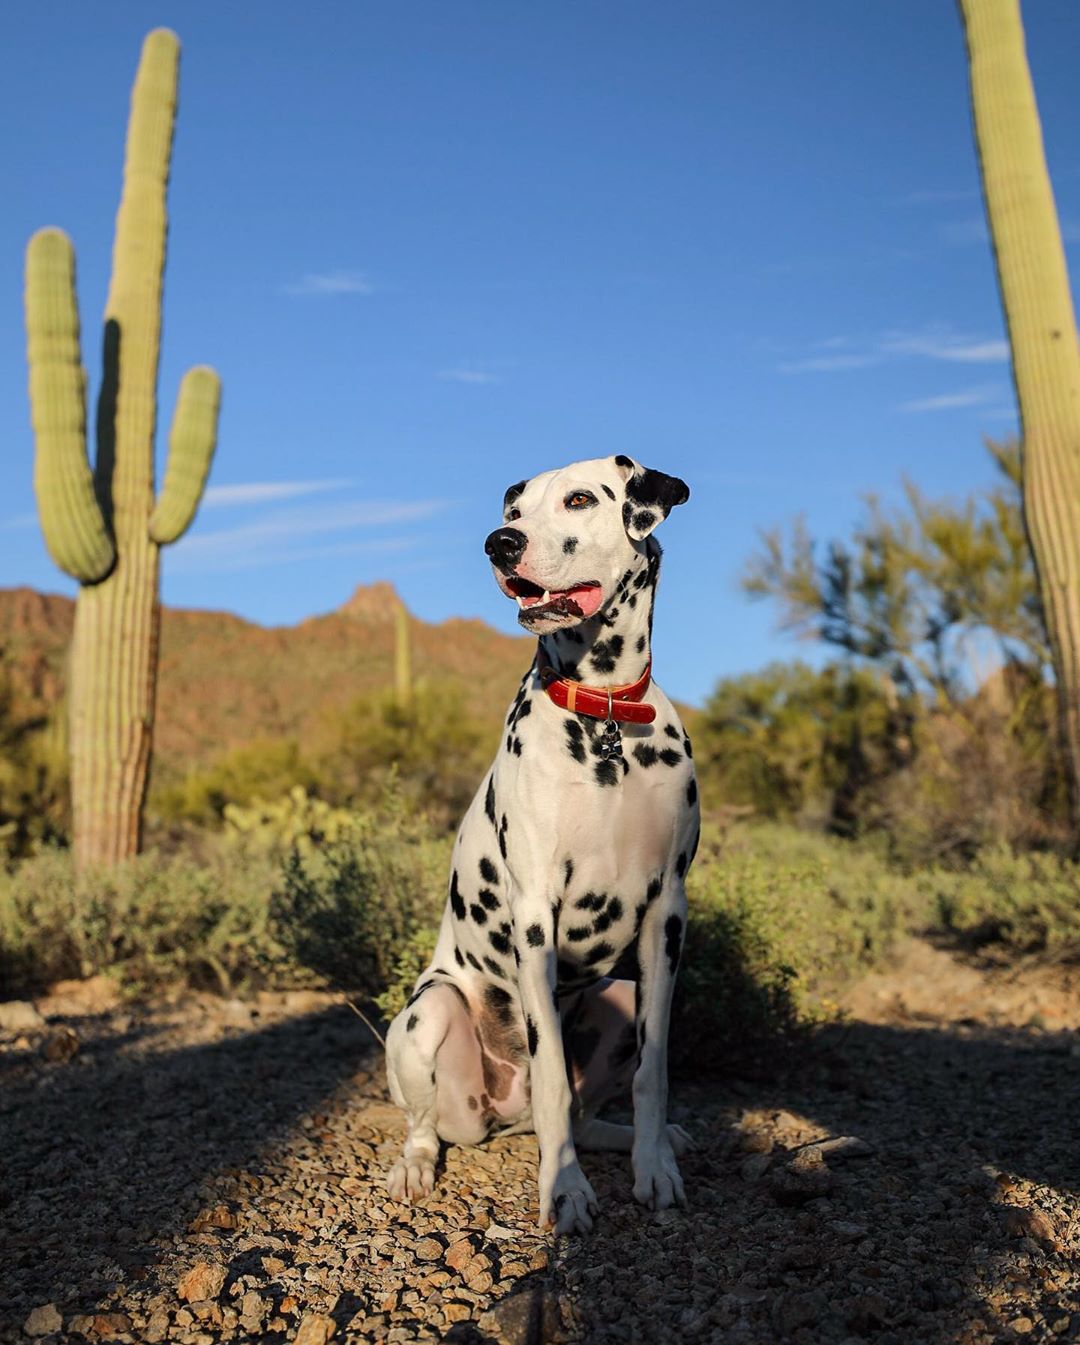 dalmation sitting down in a desert area with cactus nearby photo by Instagram user @louisonchewison